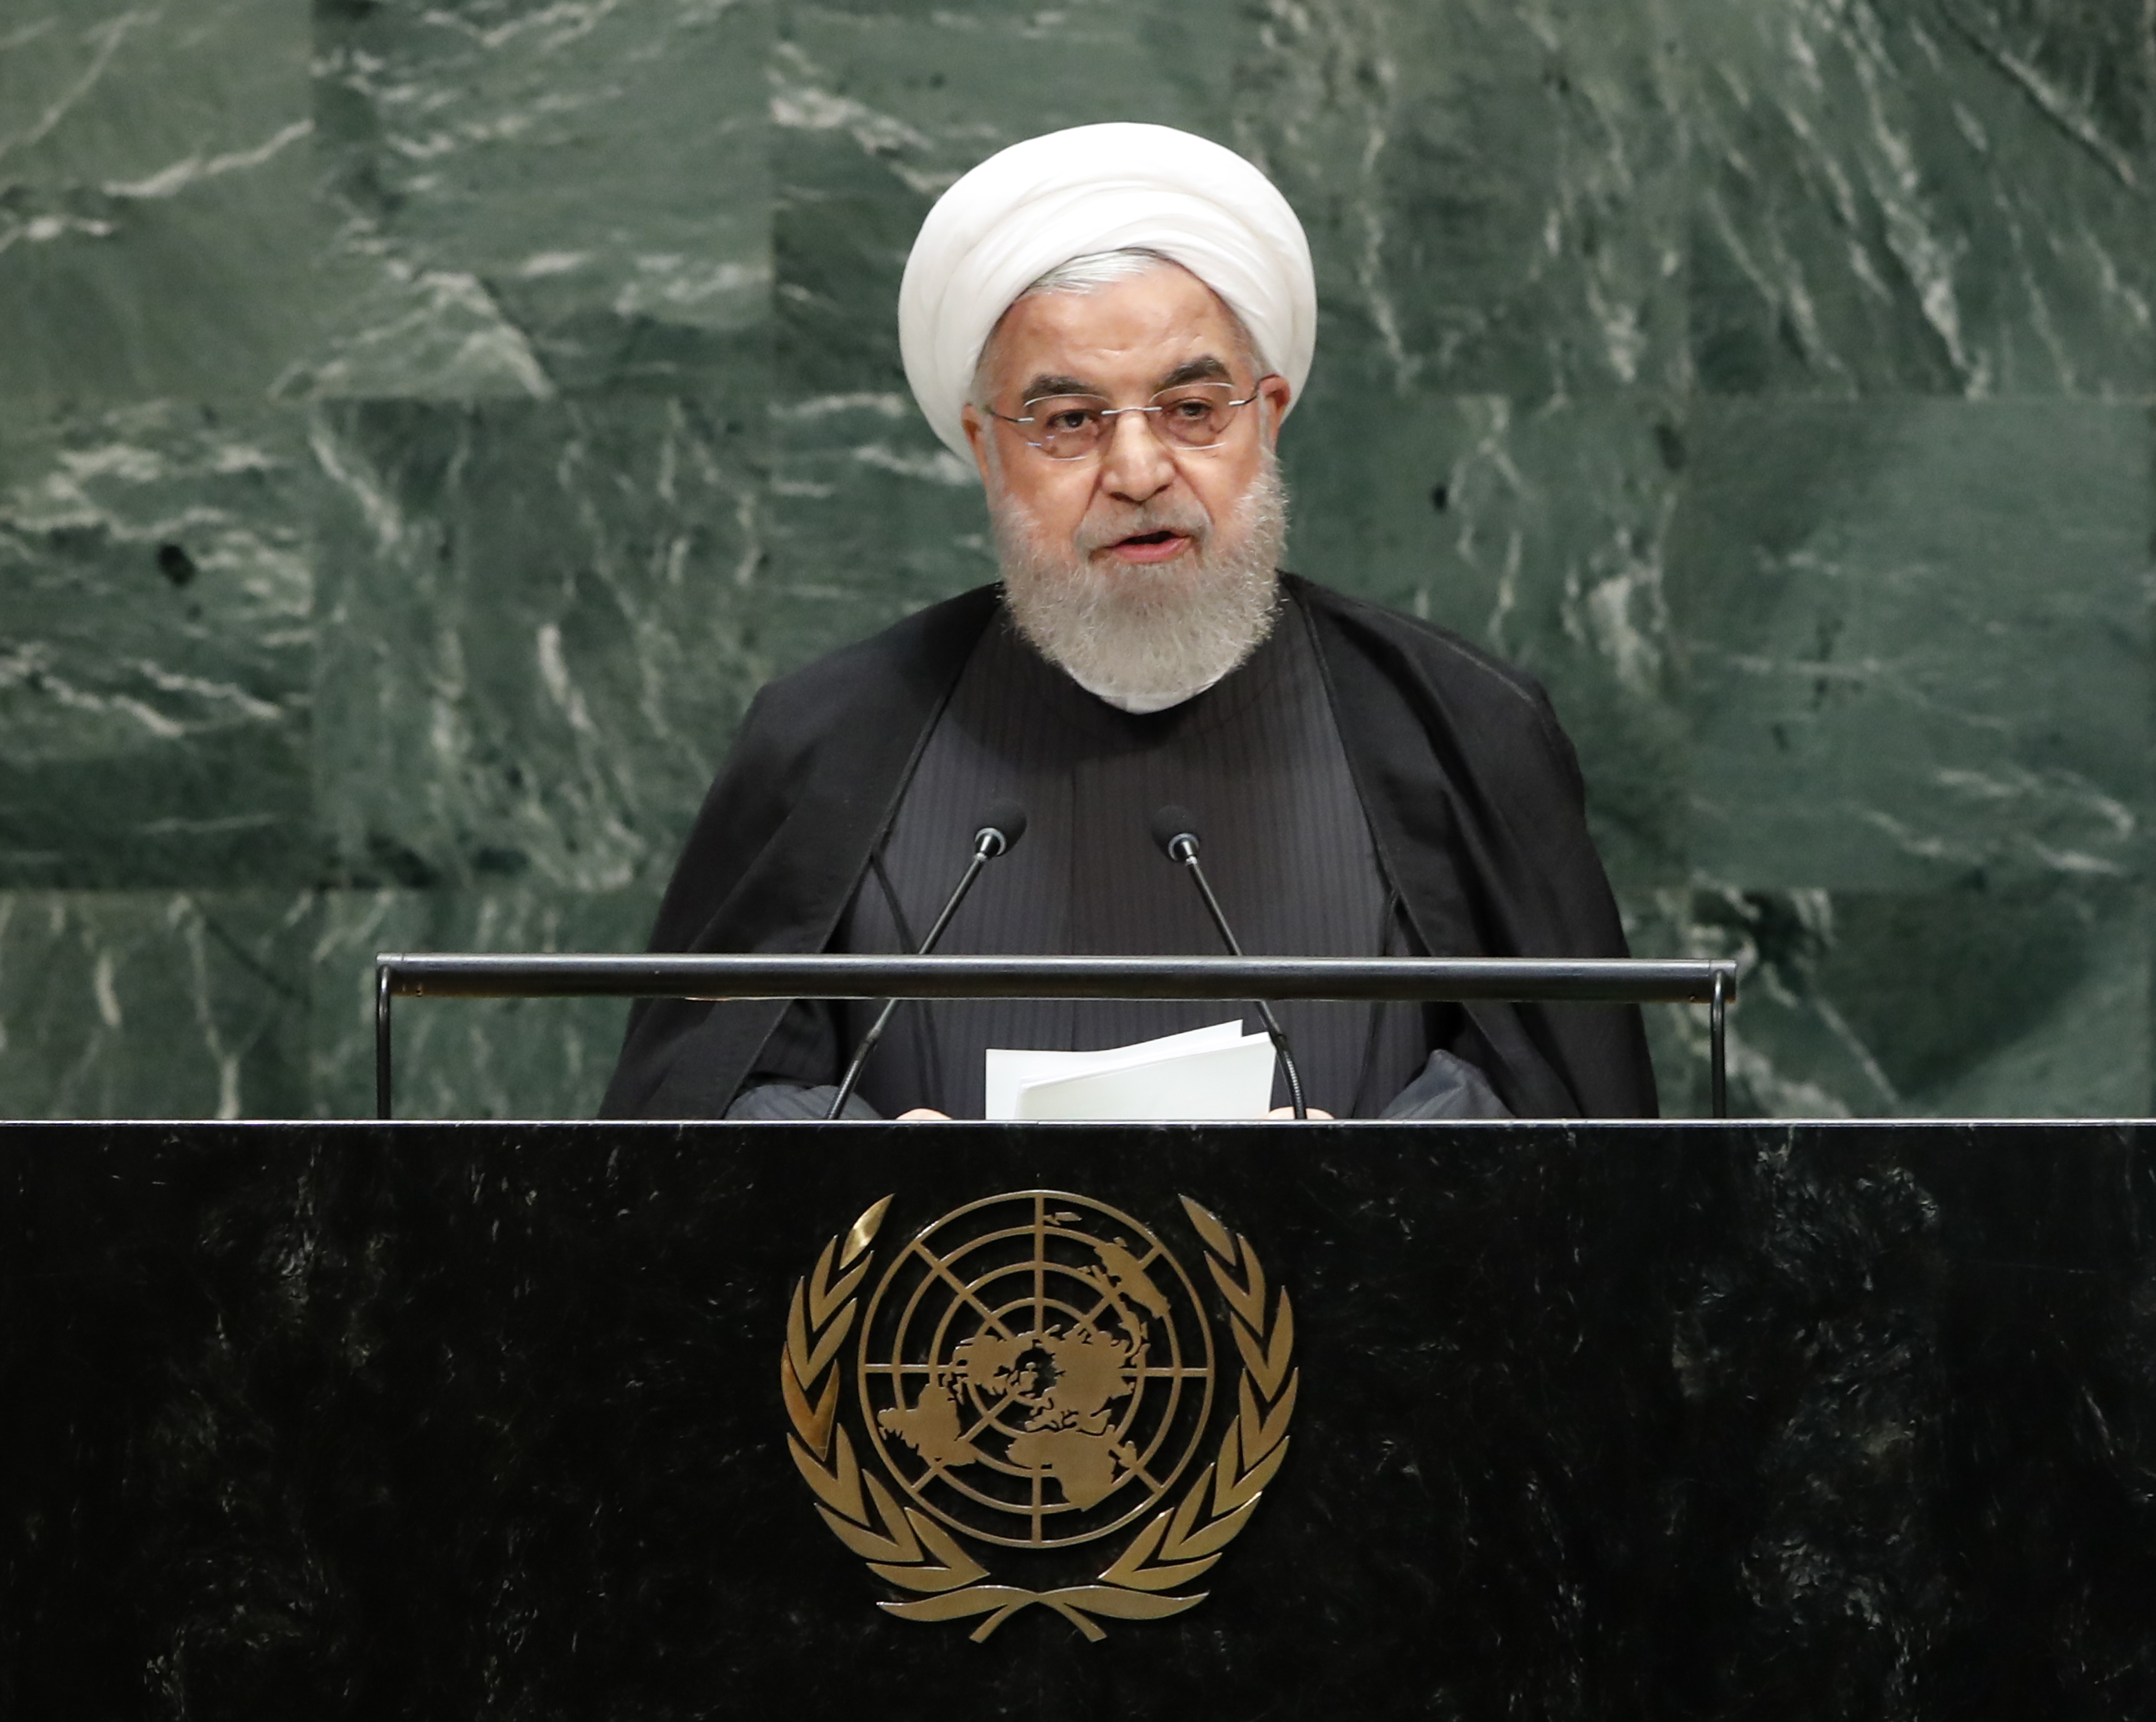 epa07868715 President of the Iran Hassan Rouhani speaks to the general debate of the 74th session of the General Assembly of the United Nations at United Nations Headquarters in New York, New York, USA, 25 September 2019. The annual meeting of world leaders at the United Nations runs until 30 September 2019.  EPA/JASON SZENES